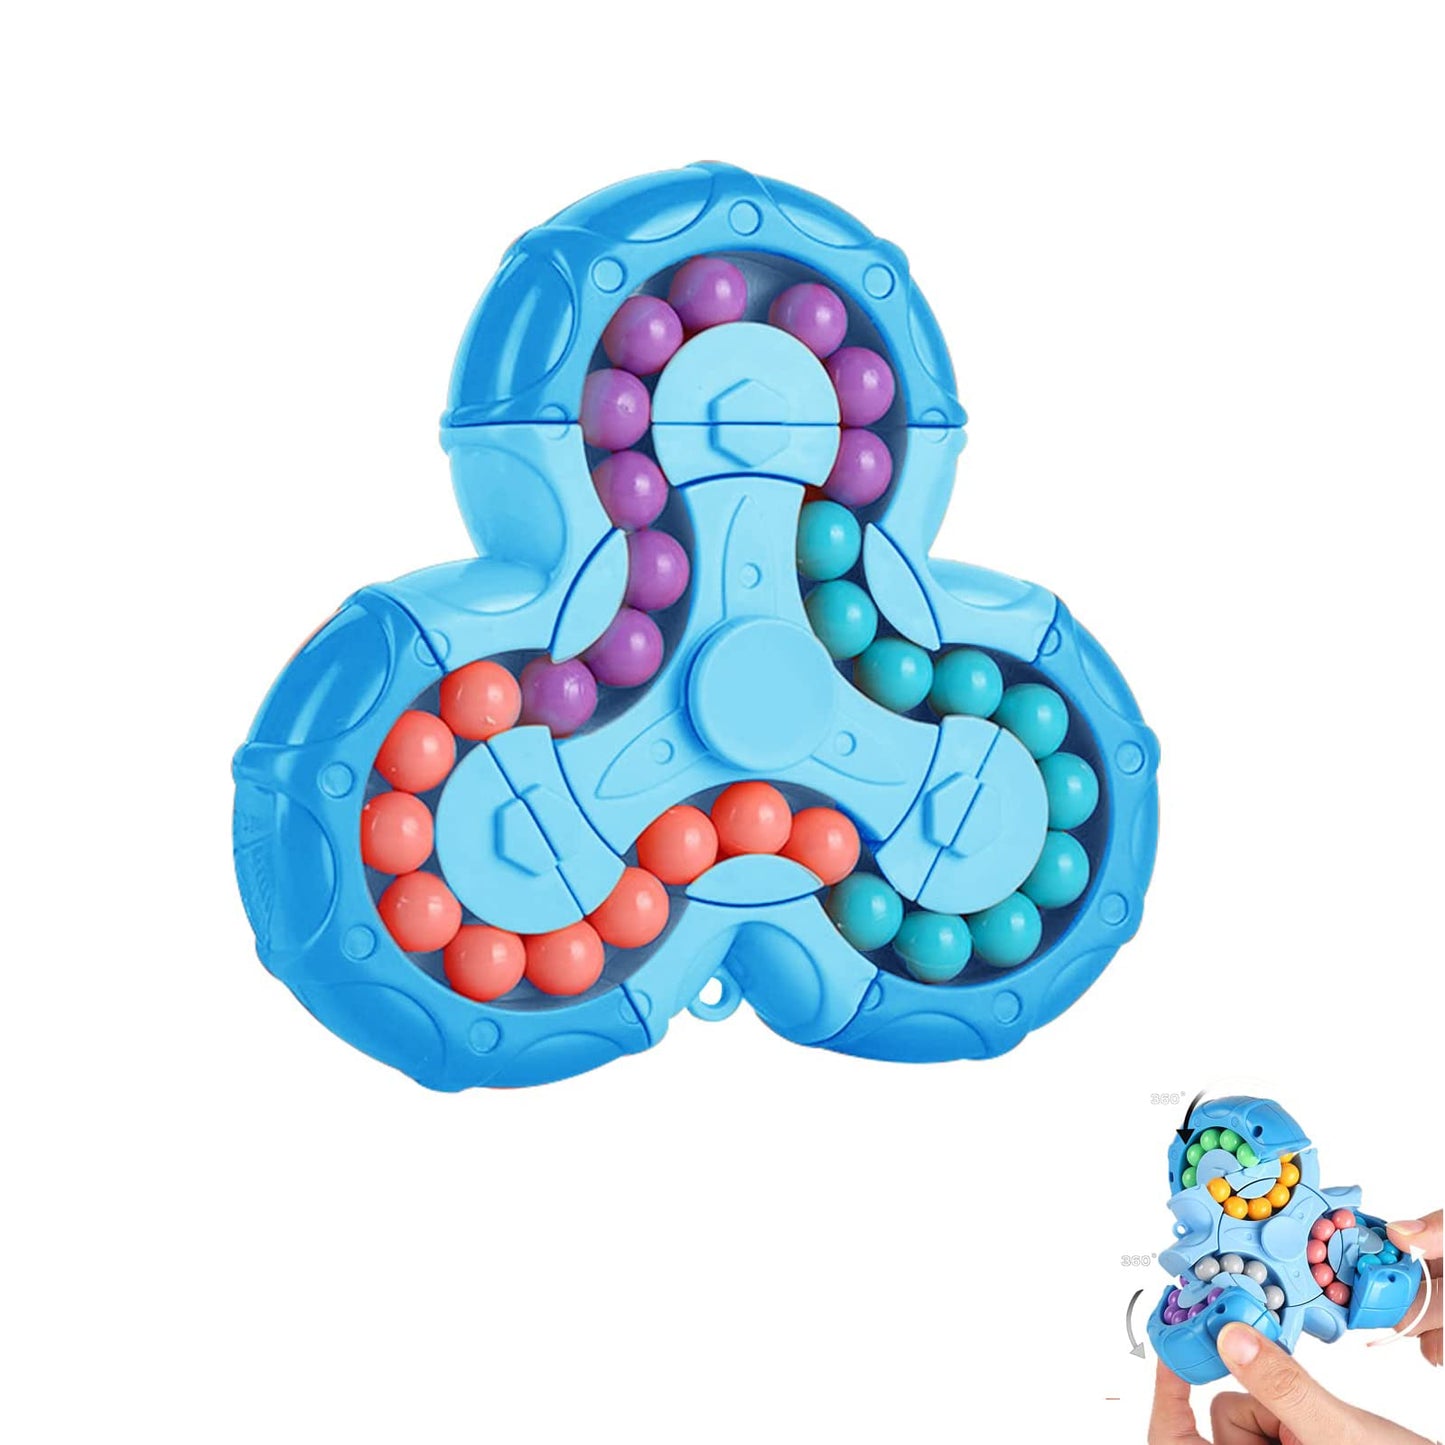 Magic Bean Puzzle Toy, Rotating Magic Bean Cube&Fidget Spinner Toys 2-in-1, Magic Ball Brain Teaser STEM Game, Gift For Kids Boys Girls, Teens And Adult For Birthday Christmas New Year